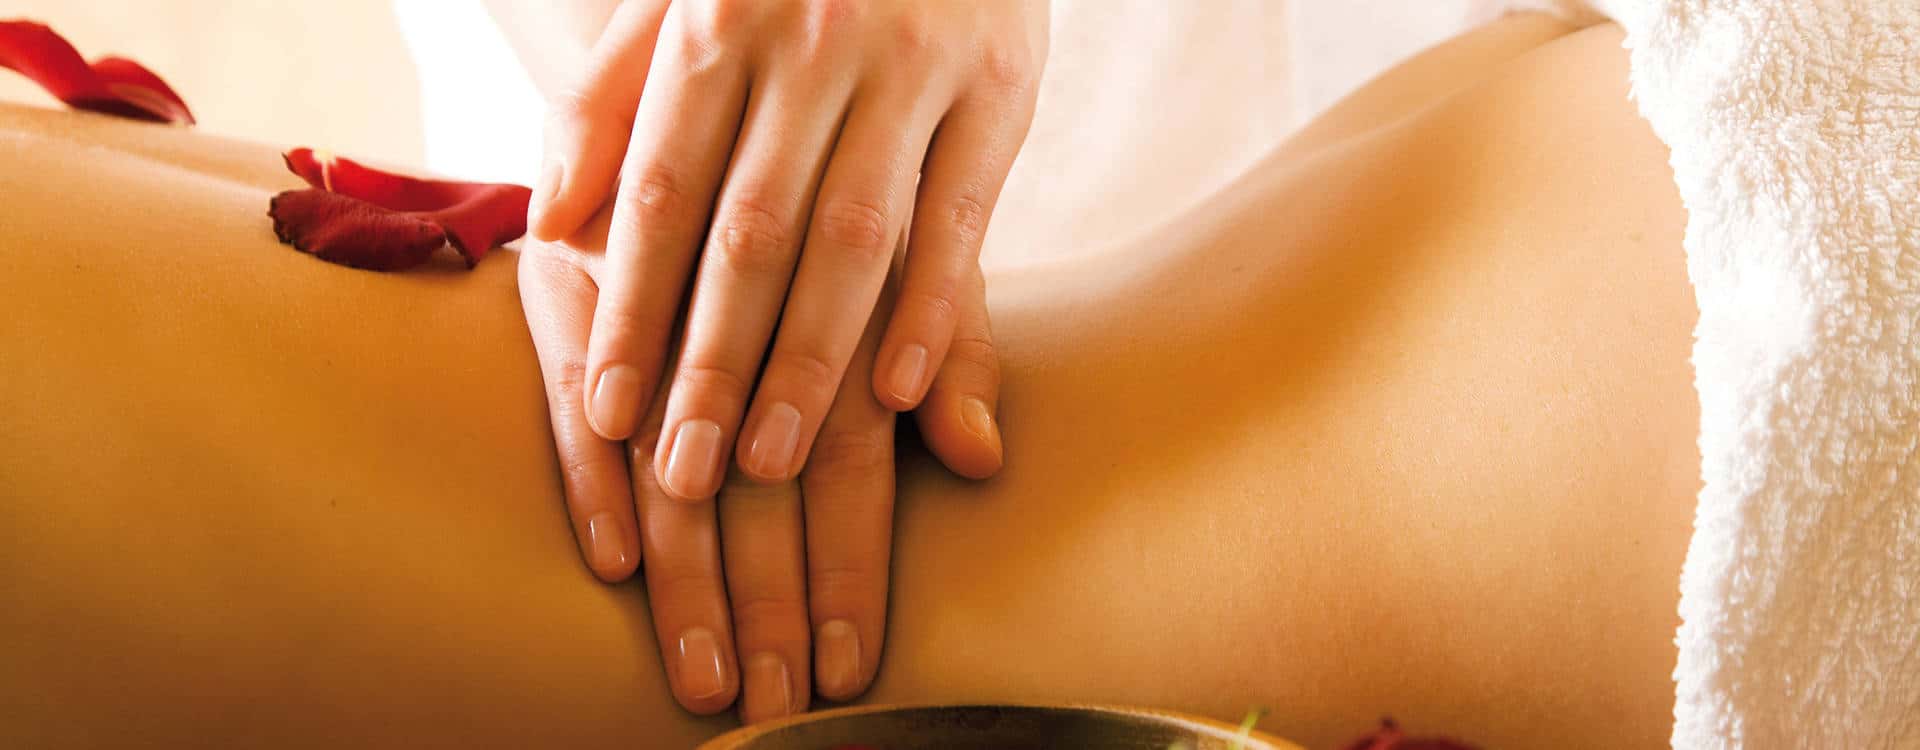 Body massage helps to relieve stress and relax your body?